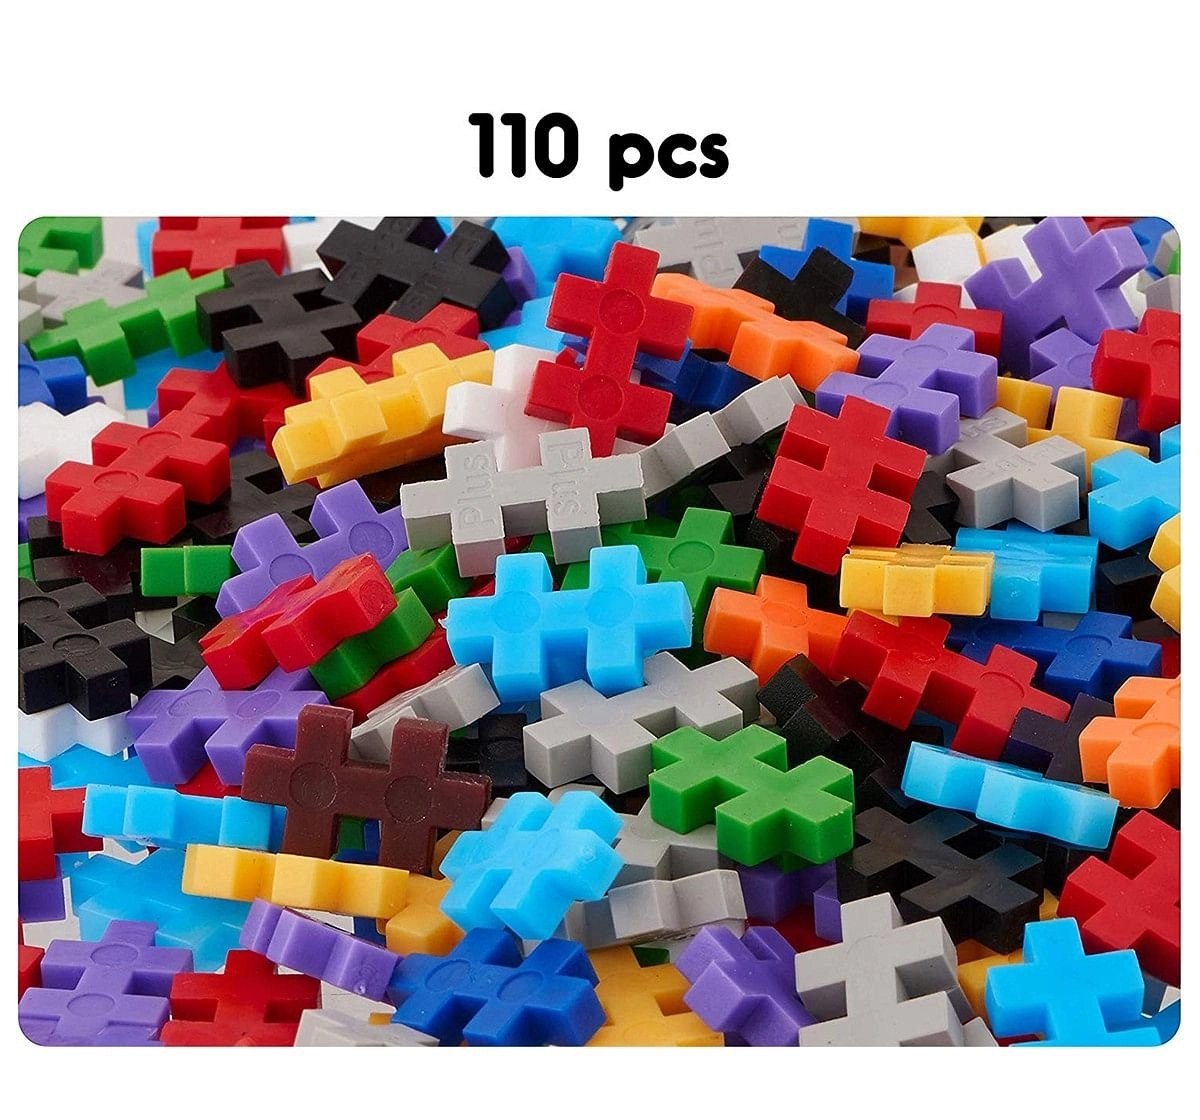 Play Panda Fixi Bricks Jungle Tube 3 Tiger And Deer With 110 Pcs, Detailed Assembly Instructions And Storage Tube Small Parts (Age 799 Years),  6Y+ (Multicolor)